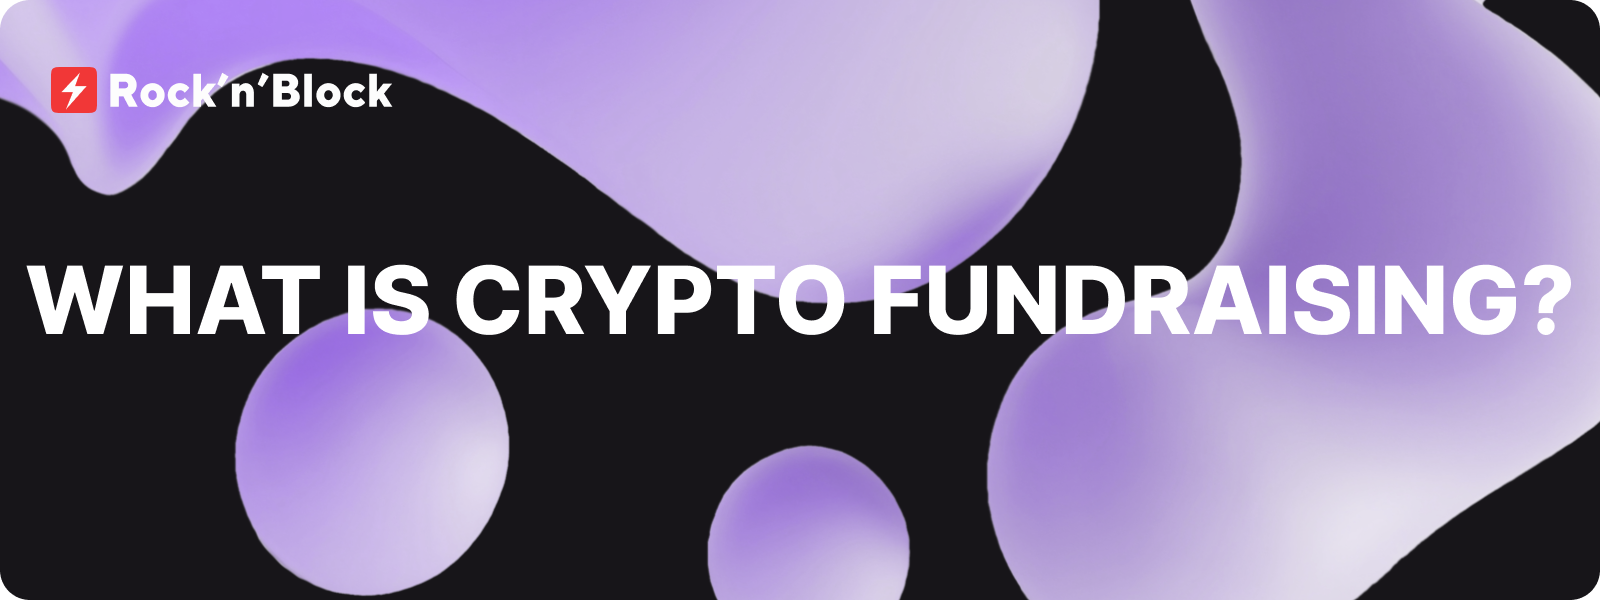 What Is Crypto Fundraising?